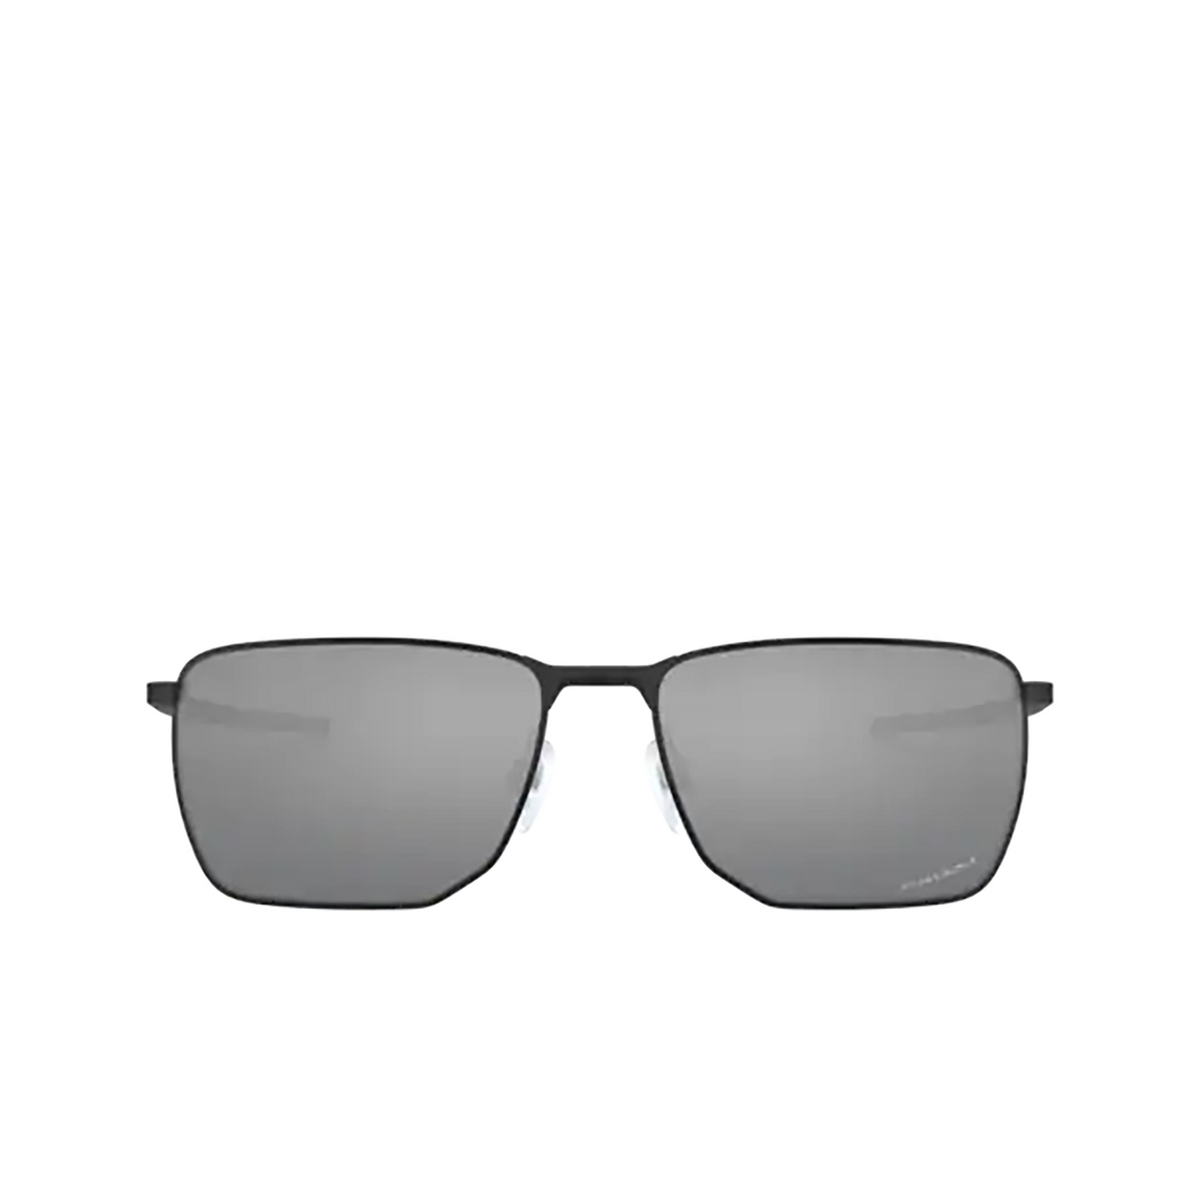 Oakley® Rectangle Sunglasses: Ejector OO4142 color Satin Black 414201 - front view.